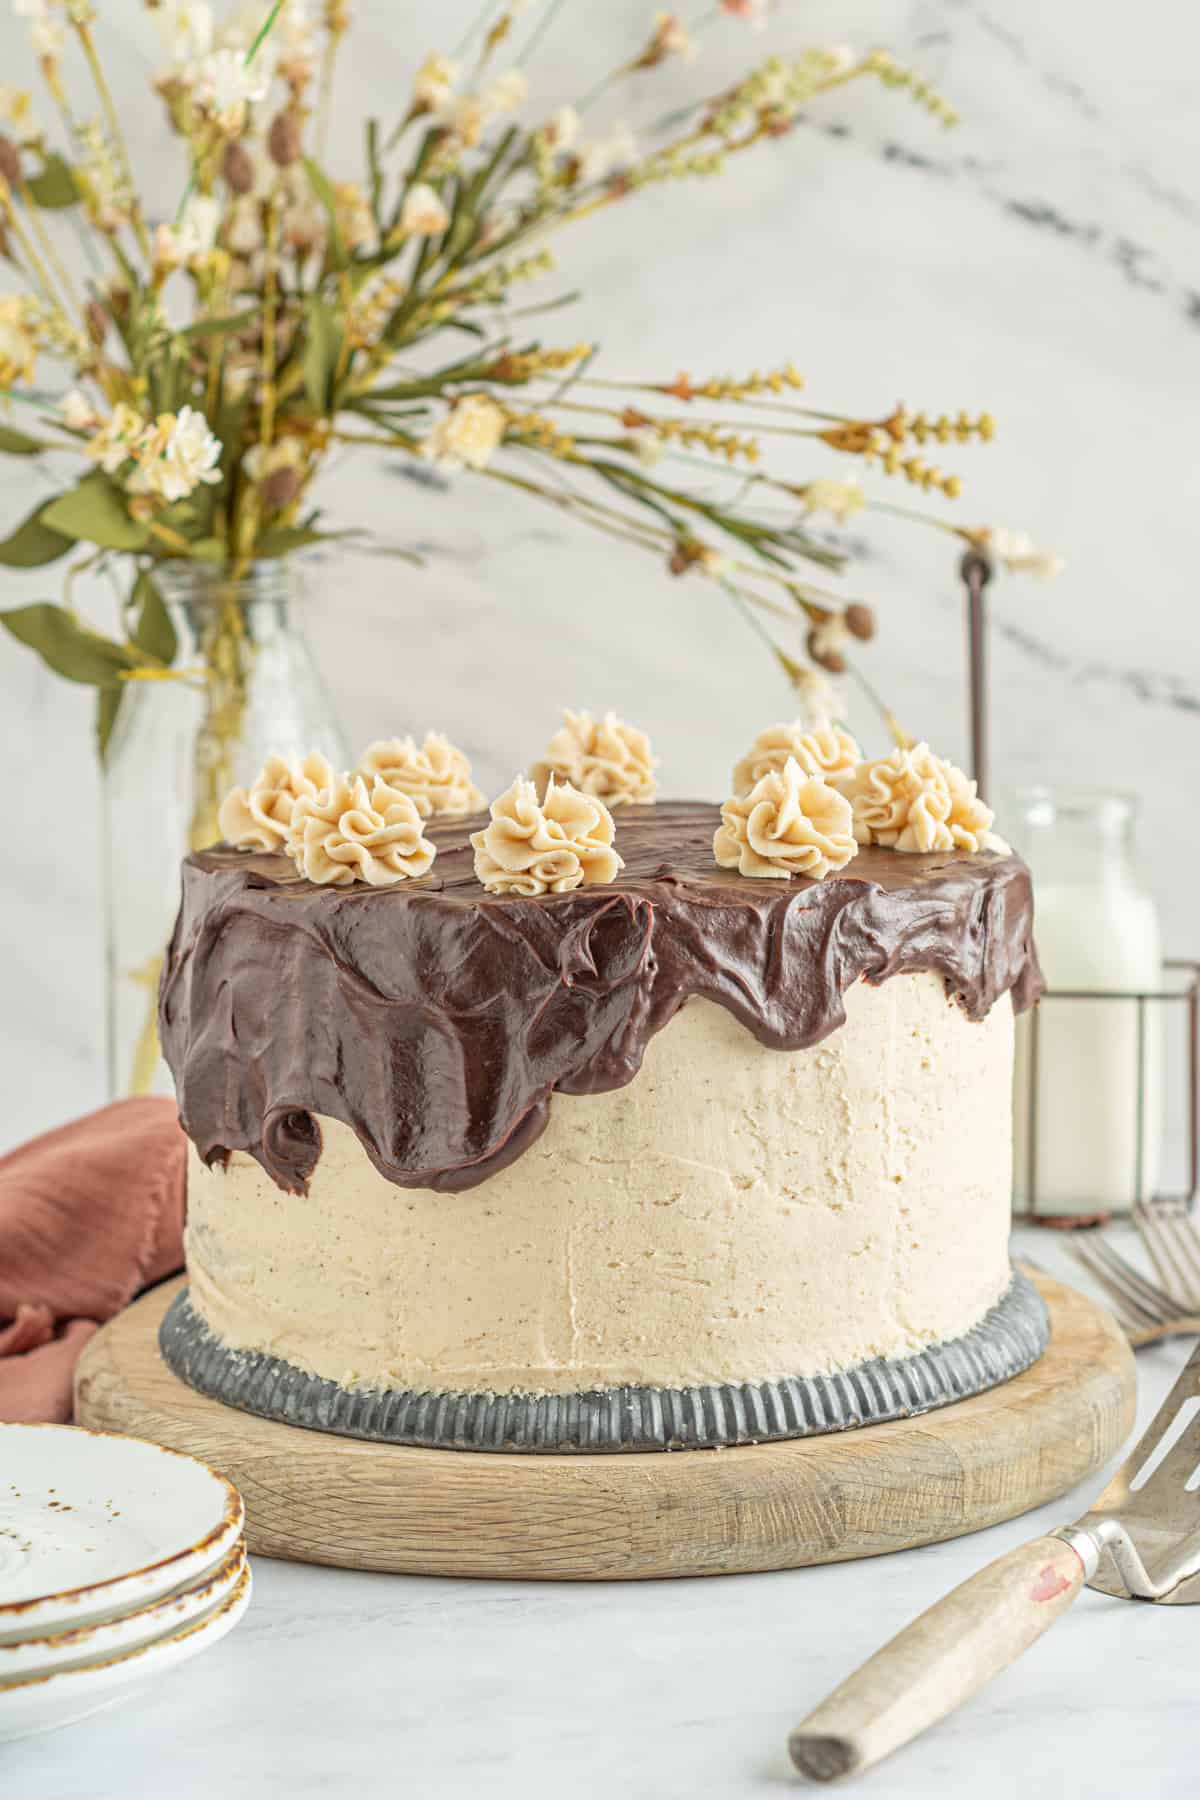 a chocolate cake with peanut butter frosting and chocolate ganache